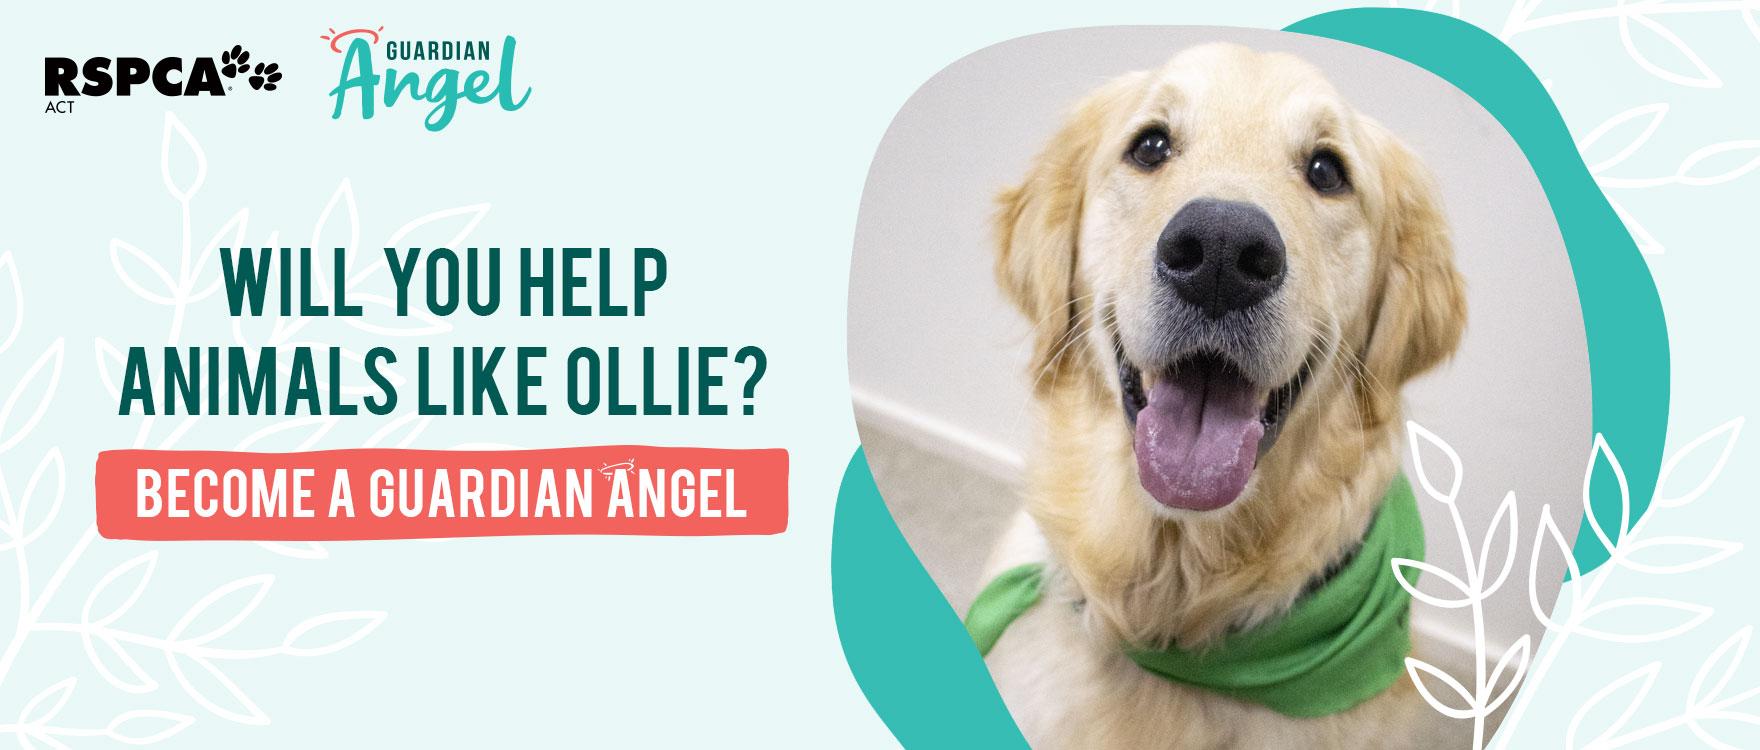 Become a Guardian Angel for an animal like Ollie